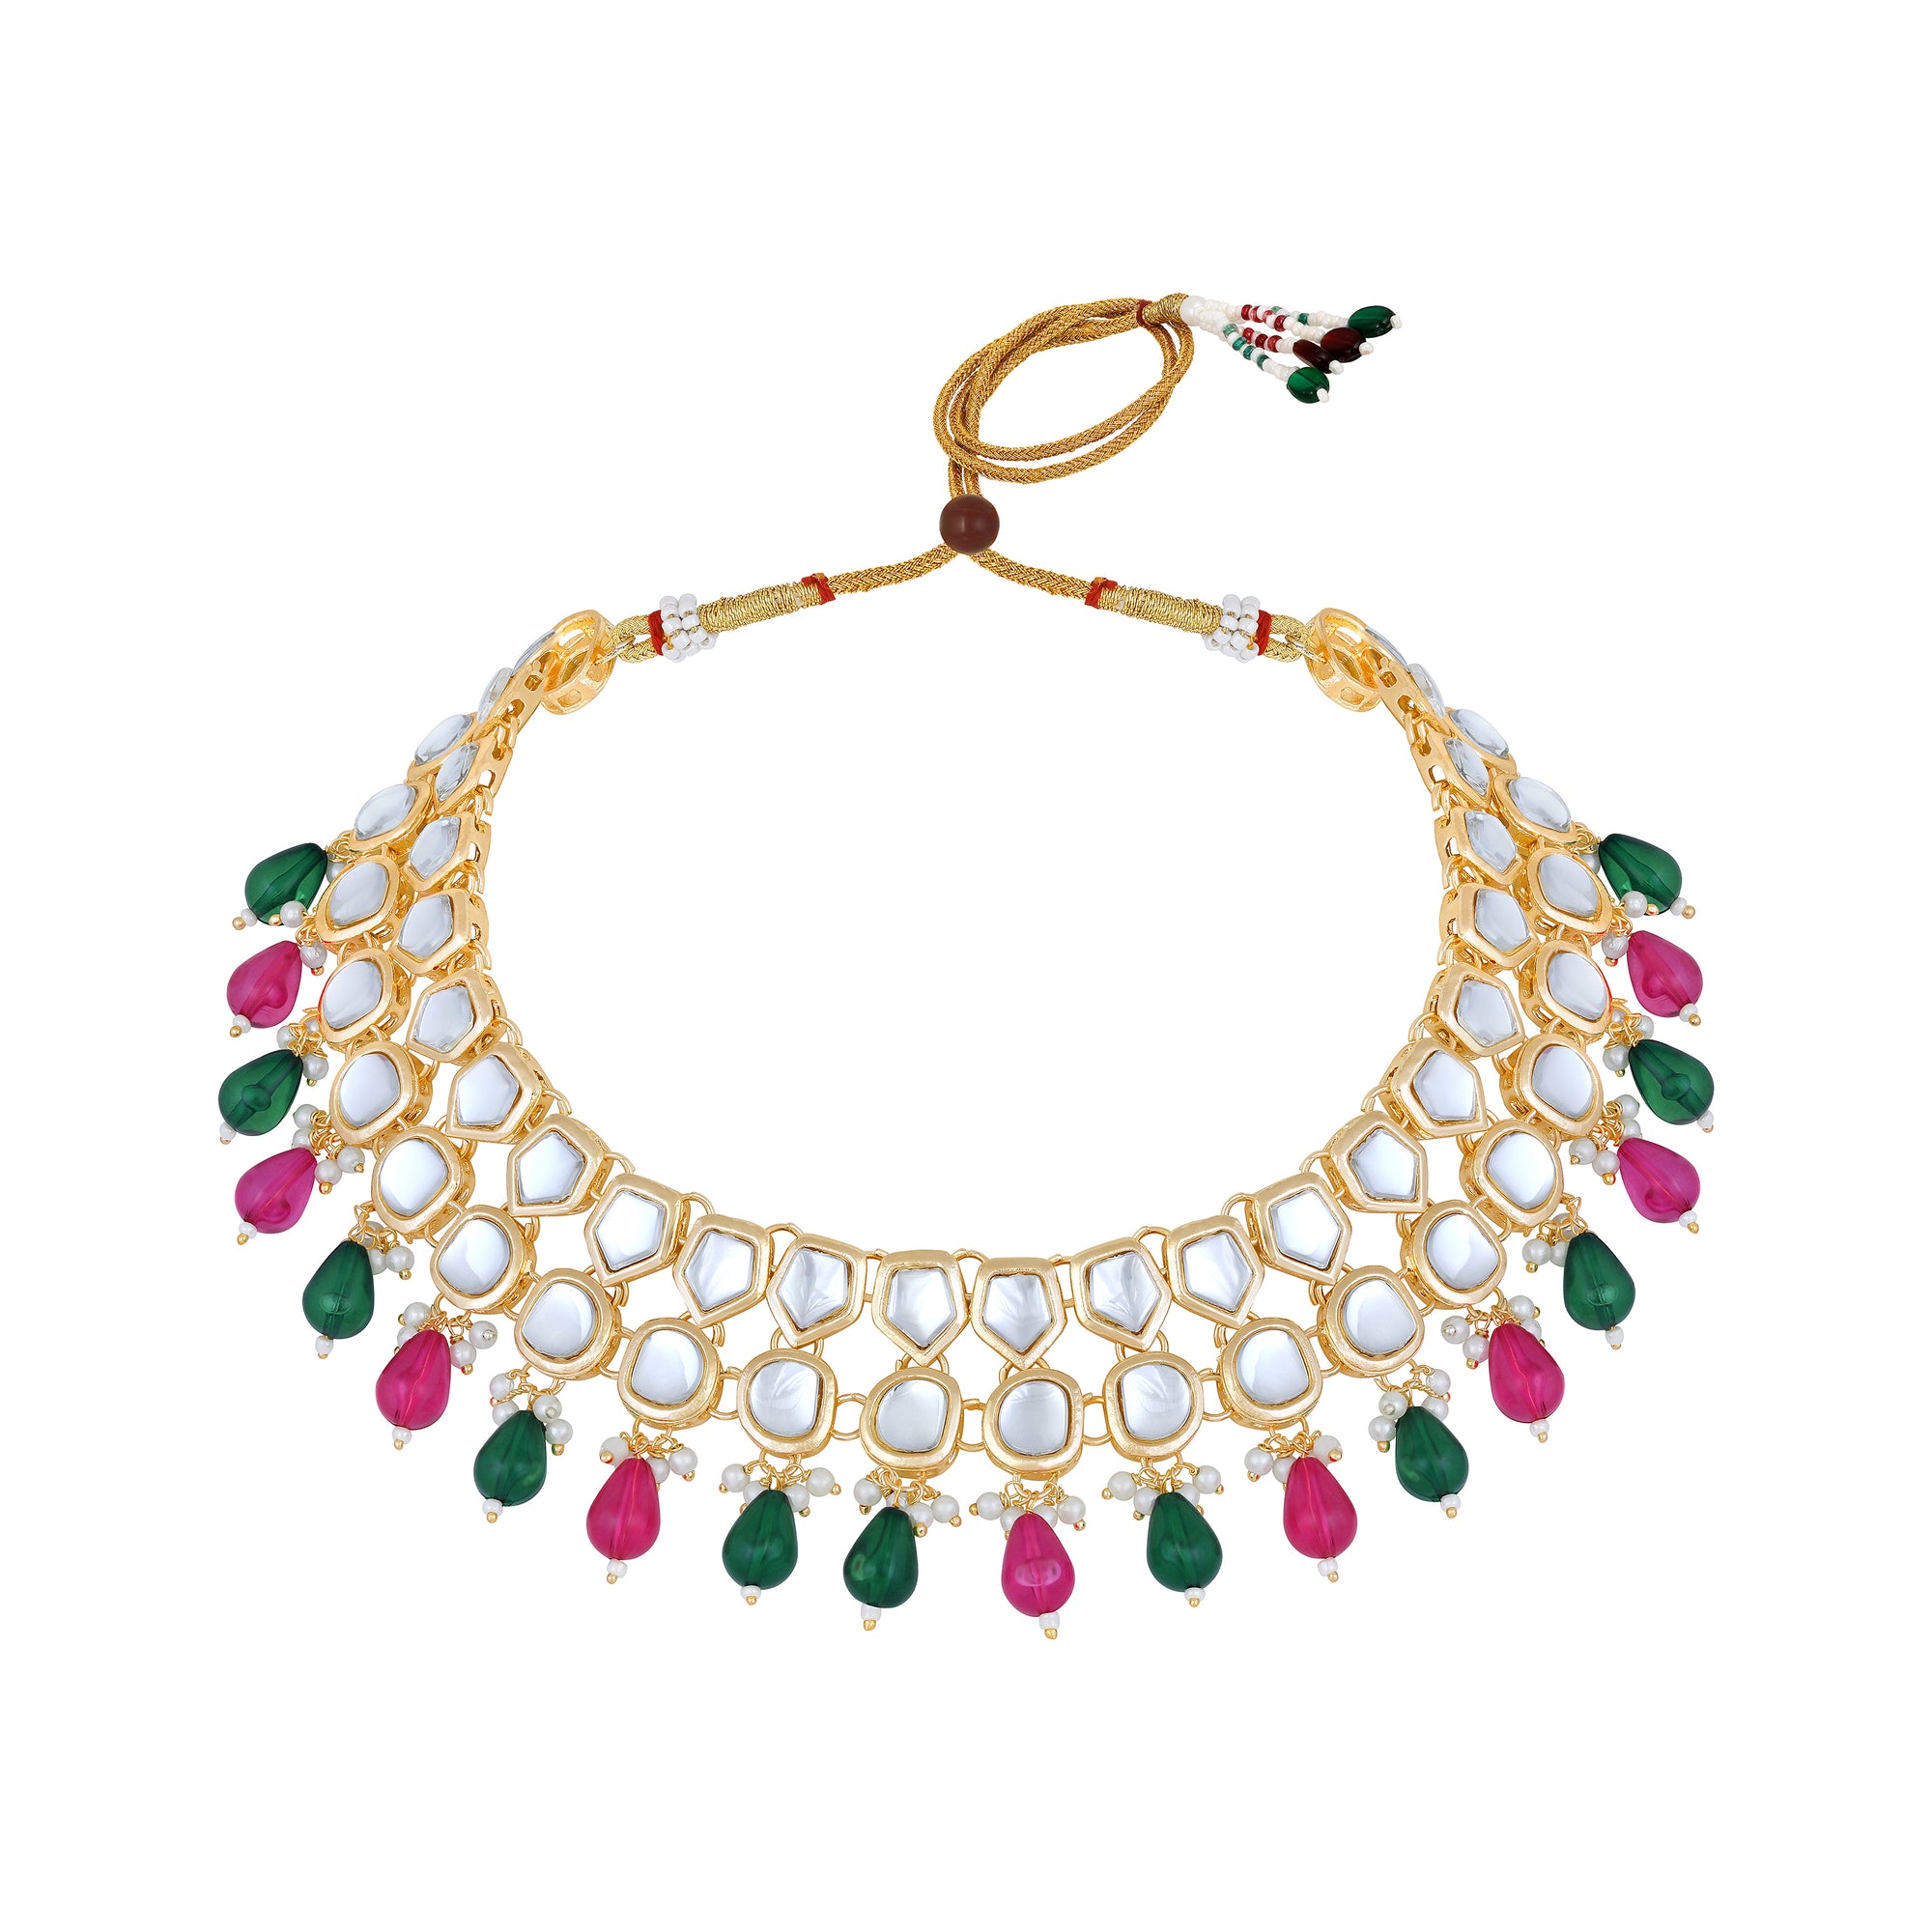 Colorful Ethnic Necklace with Pair of Earrings